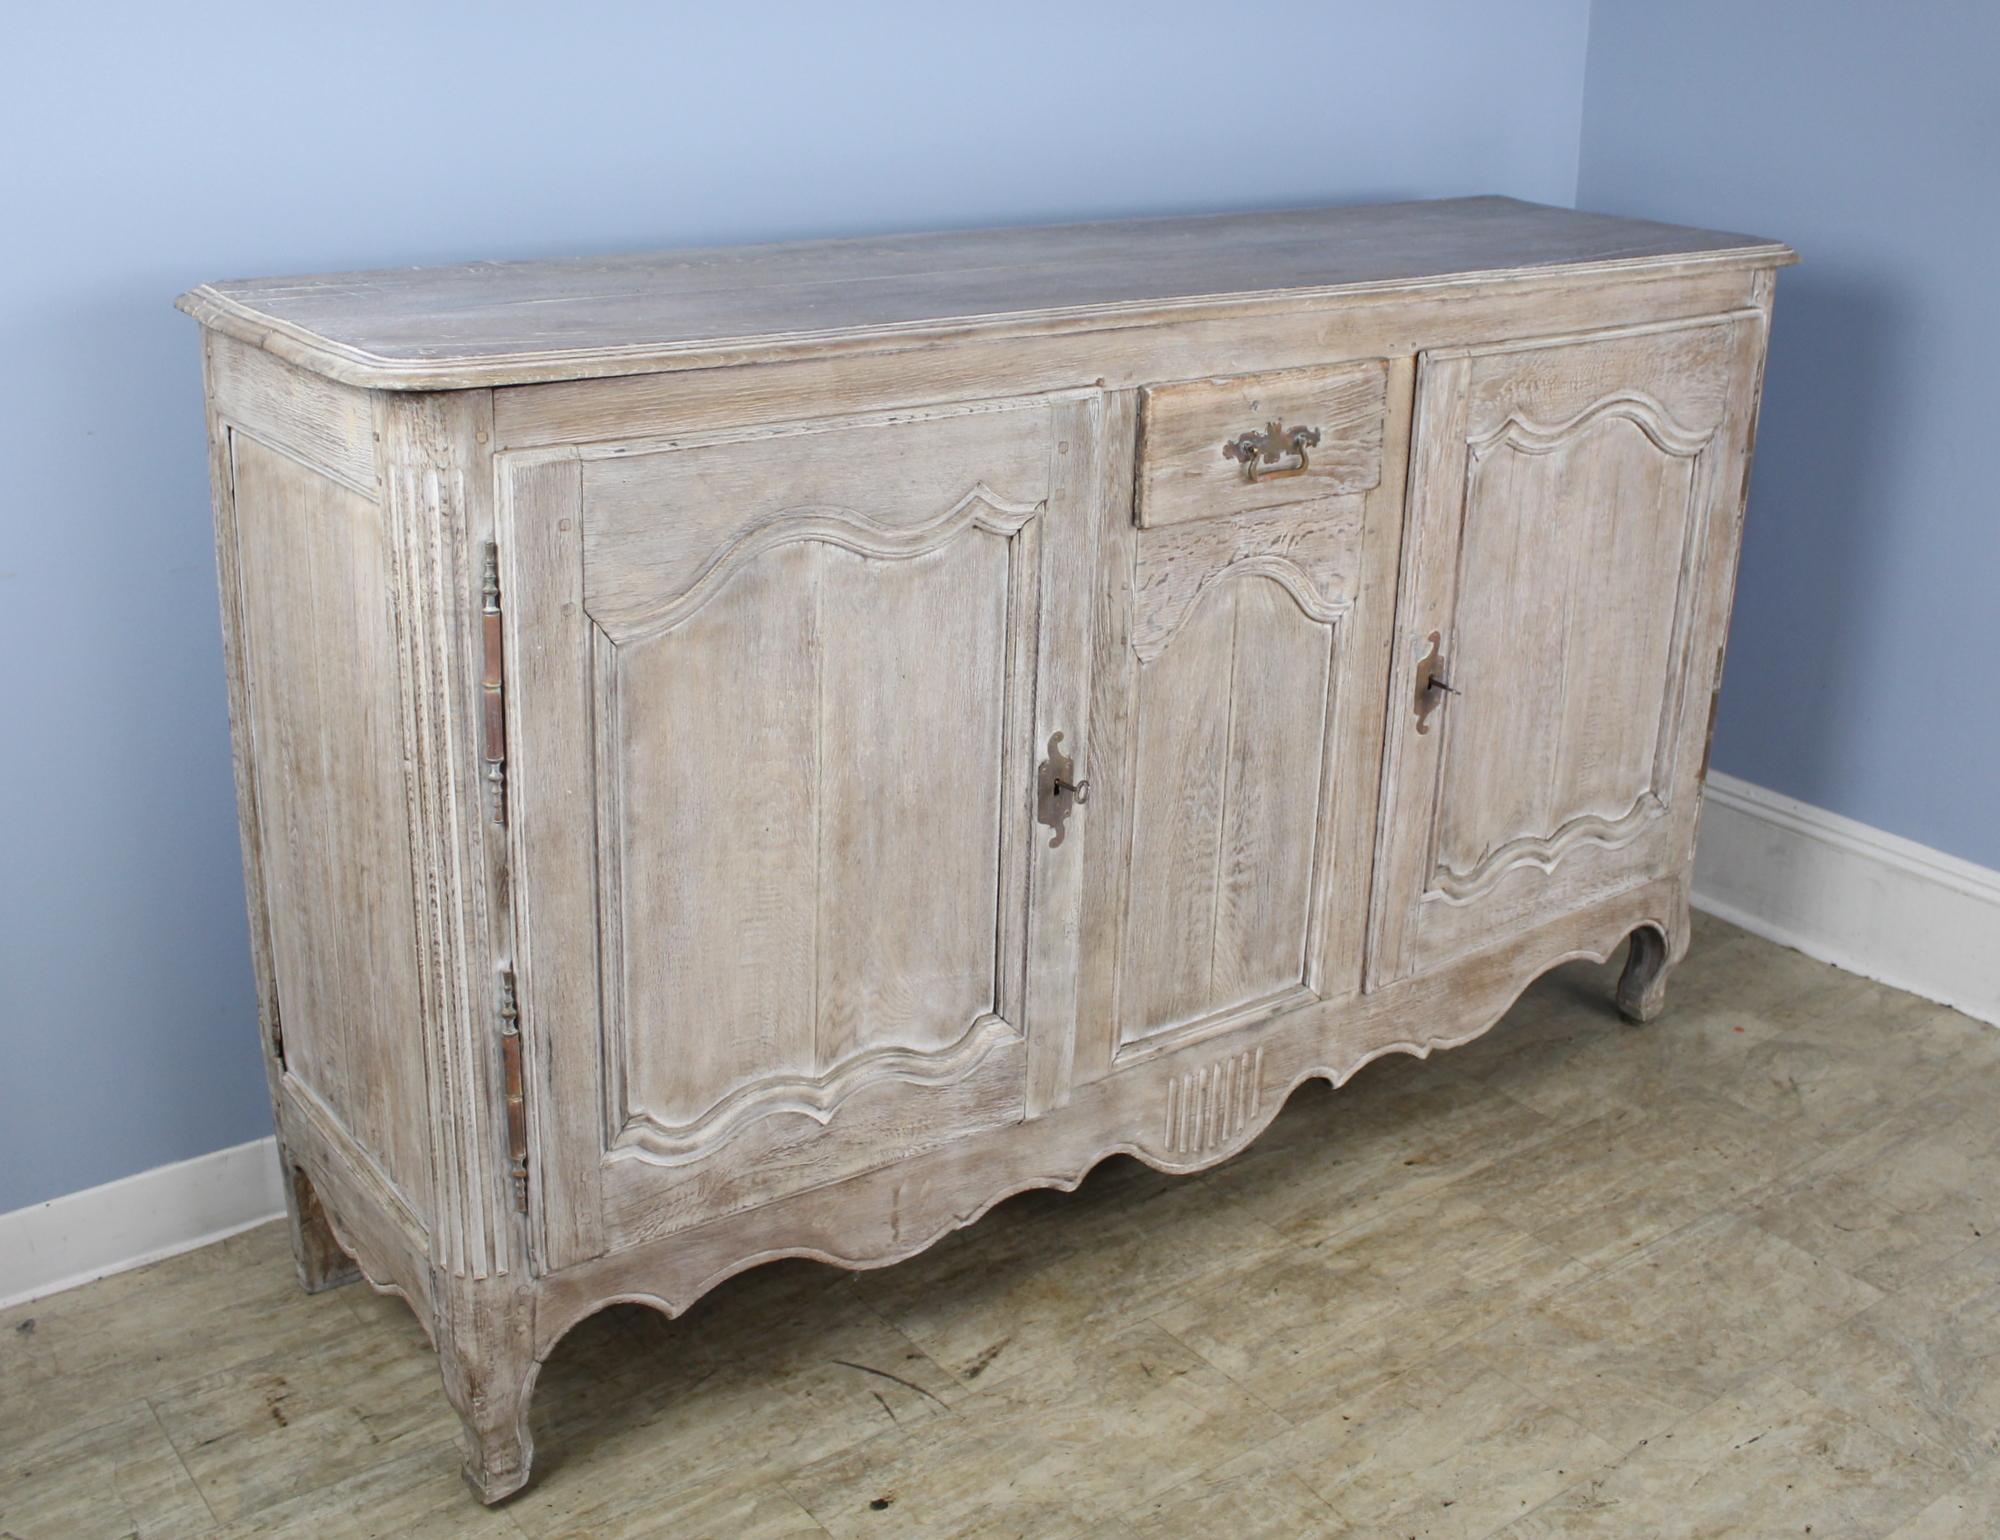 Wonderful Classic French oak buffet made modern with bleaching. The doors are well paneled as are the sides. There is a simply shaped apron. Feet are well-shaped also. Small center drawer for extra storage, and the reeded vertical quarter columns at